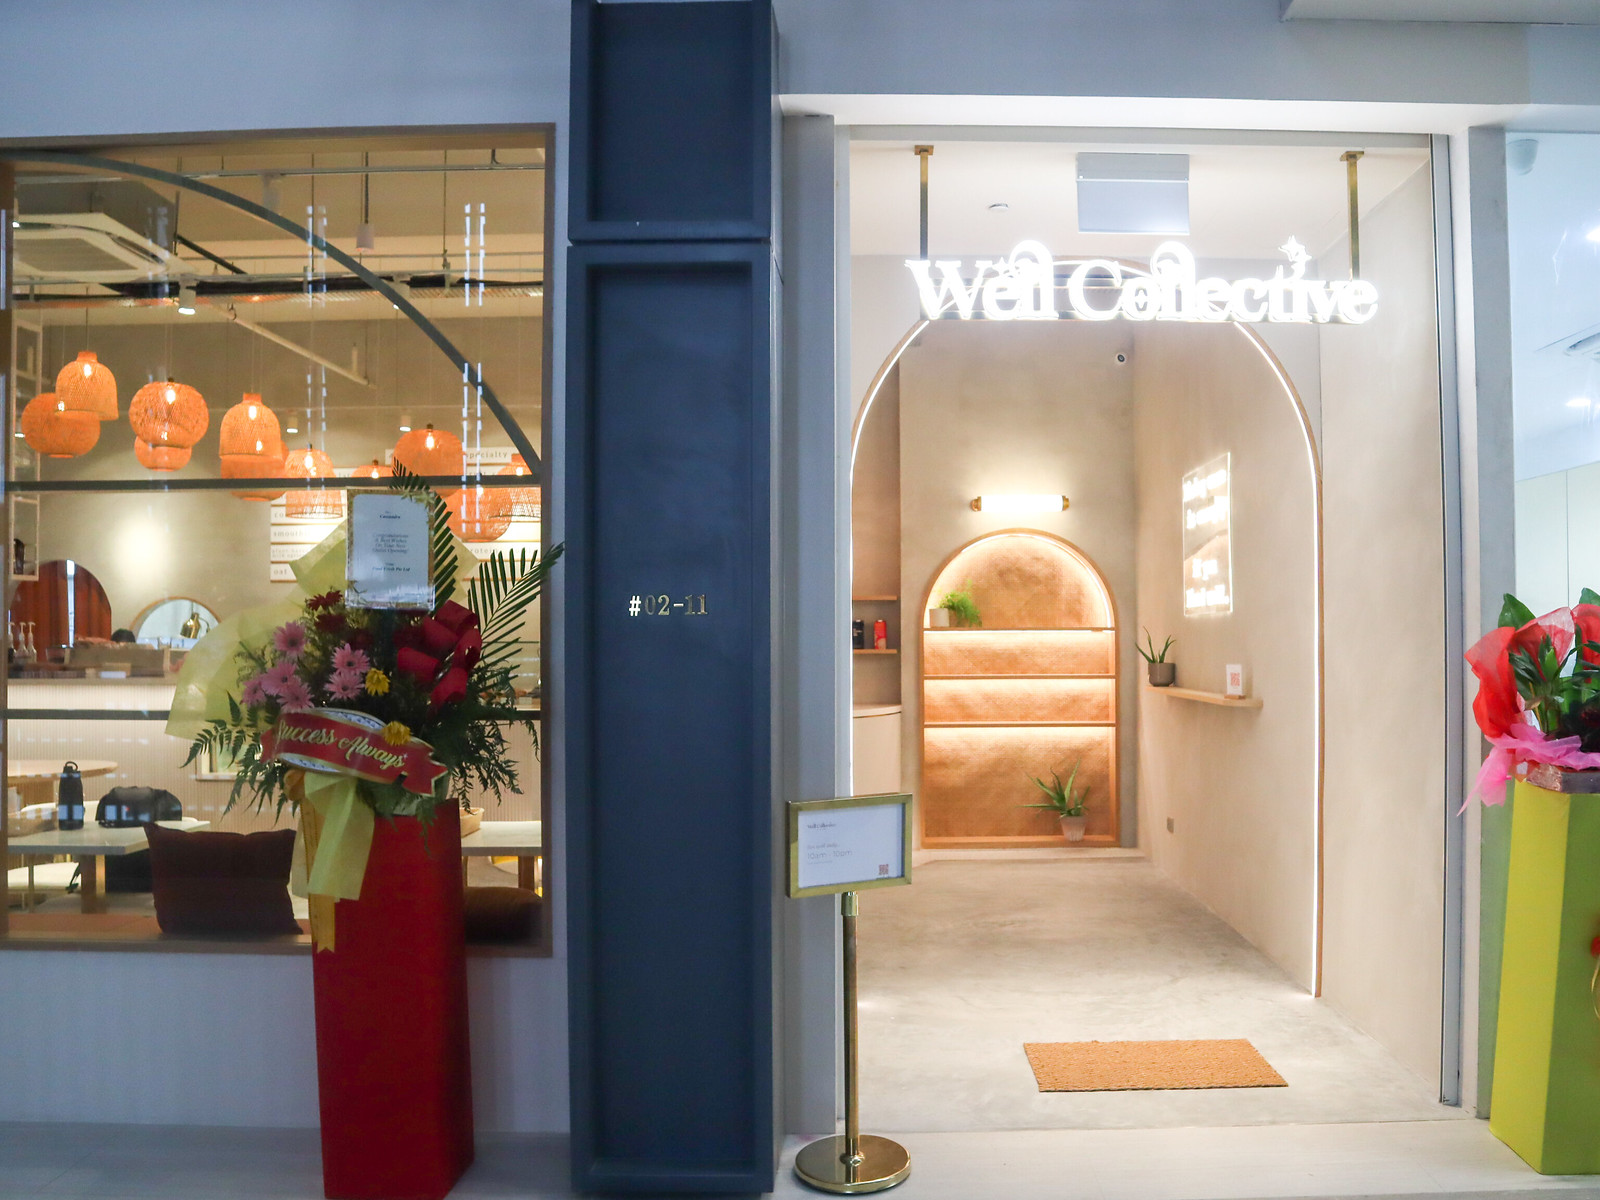 Well Collective - storefront